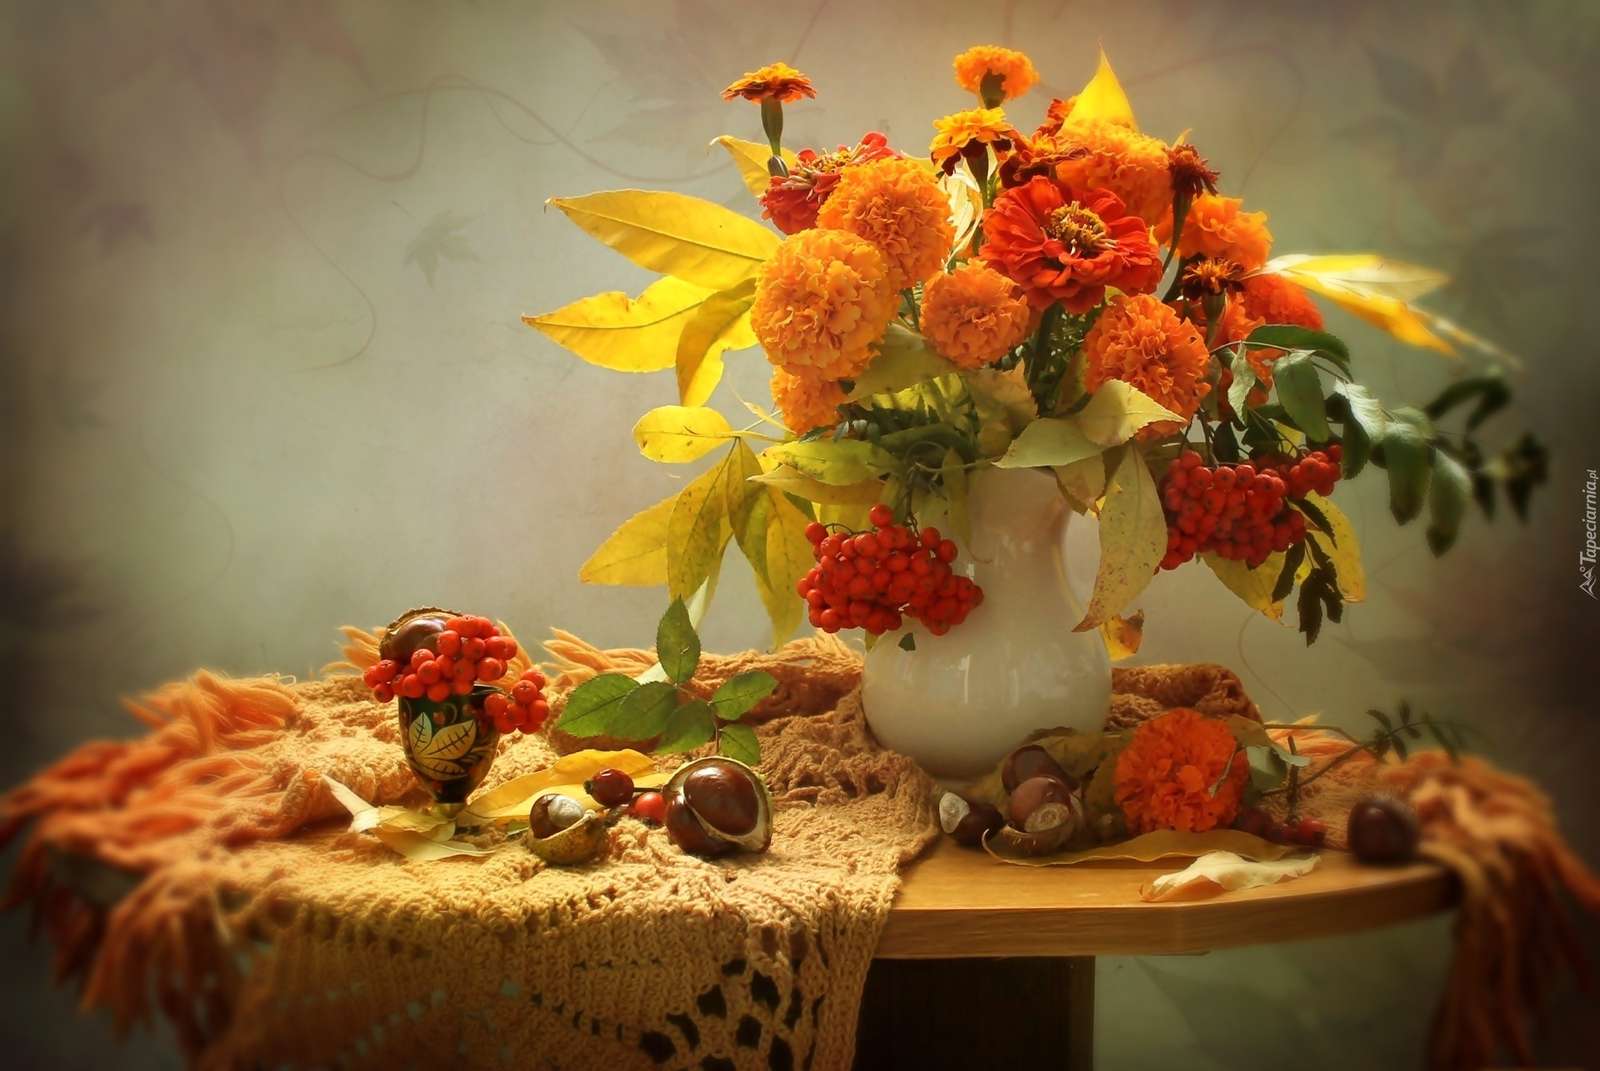 Composition - flowers in a vas jigsaw puzzle online